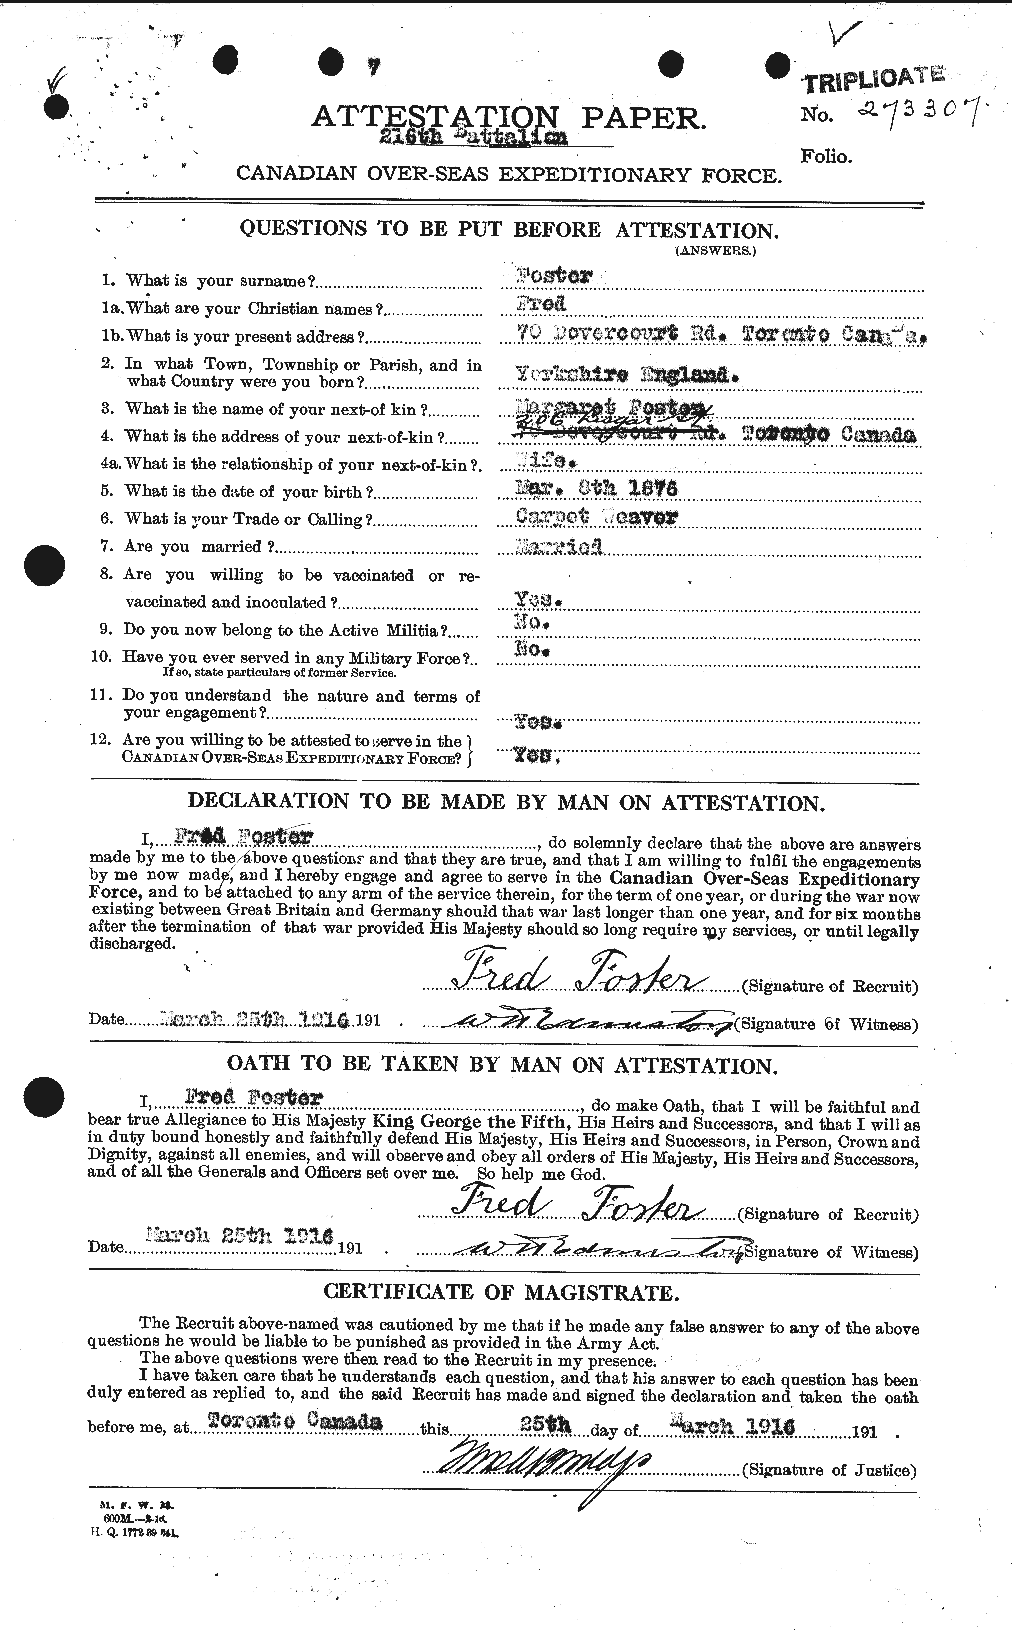 Personnel Records of the First World War - CEF 330636a